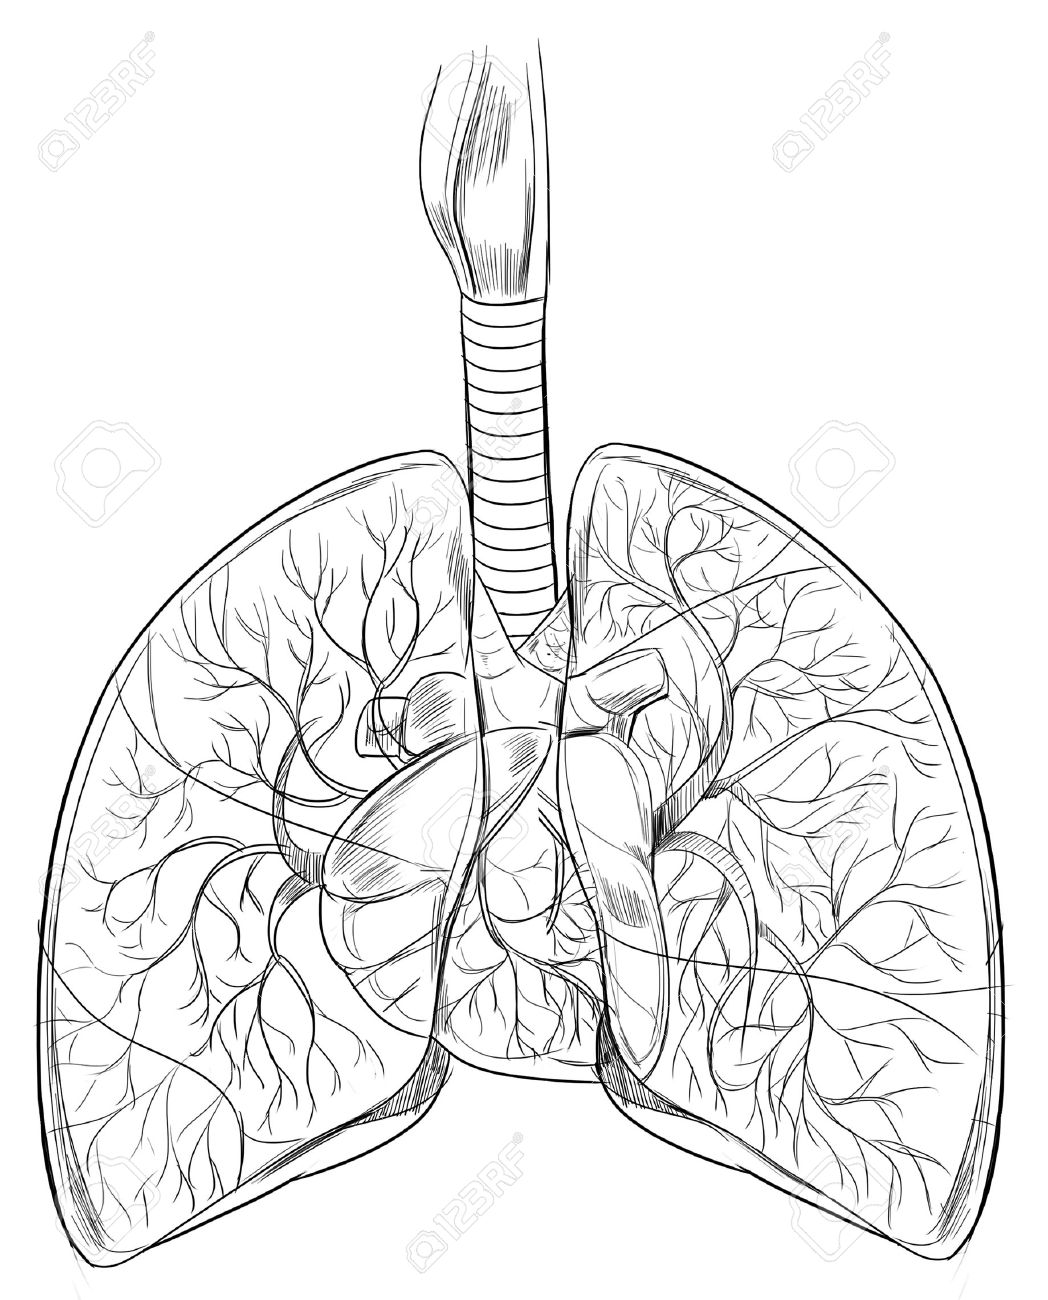 Outline Sketch Of The Human Lungs Royalty Free Cliparts, Vectors.